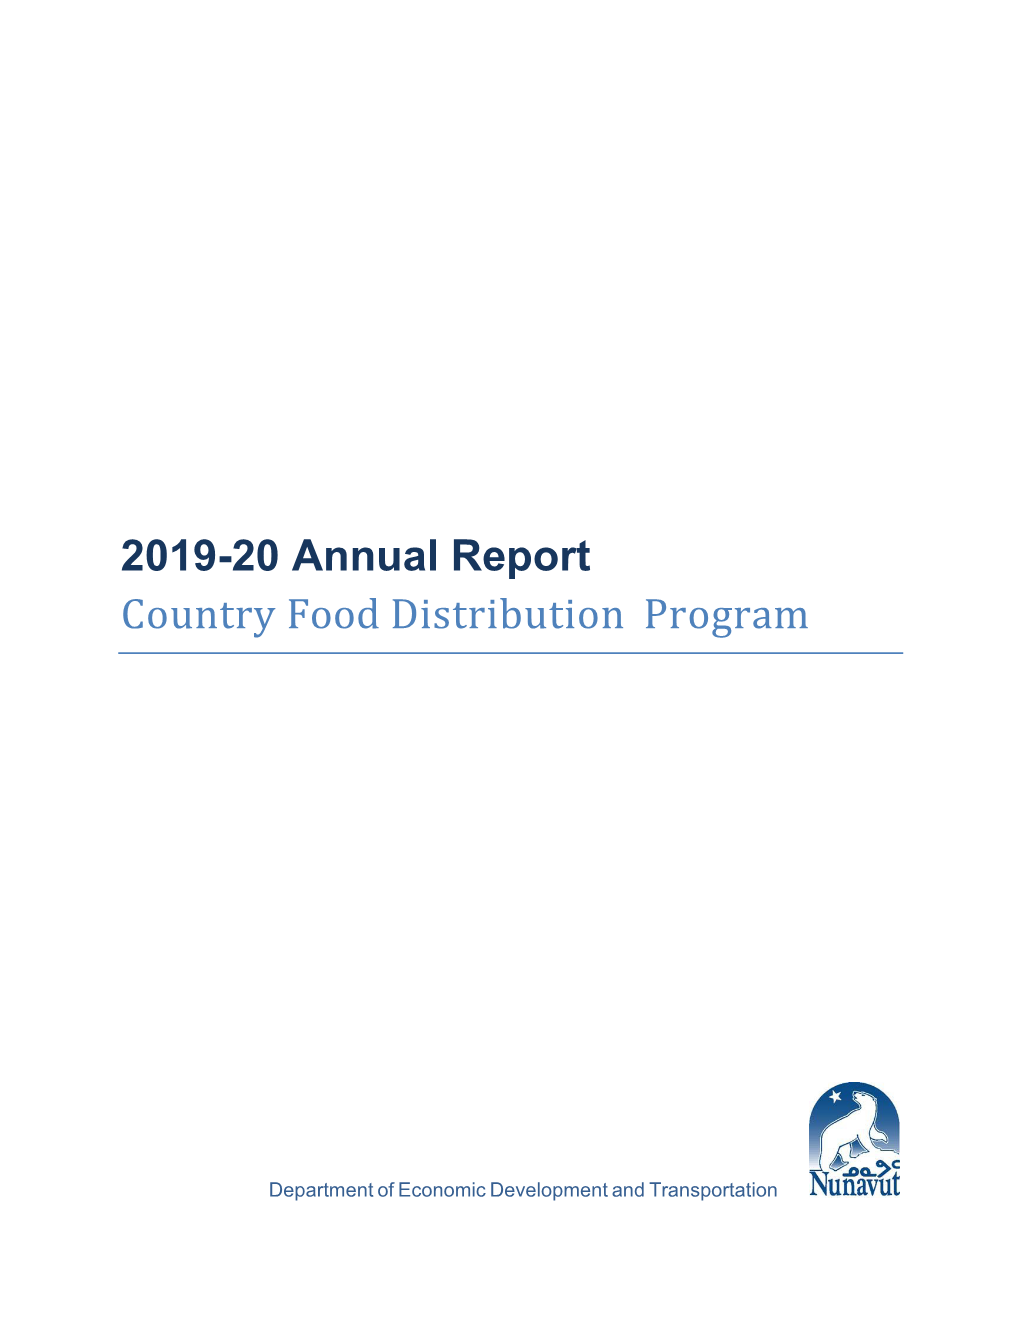 2019-20 Annual Report Country Food Distribution Program